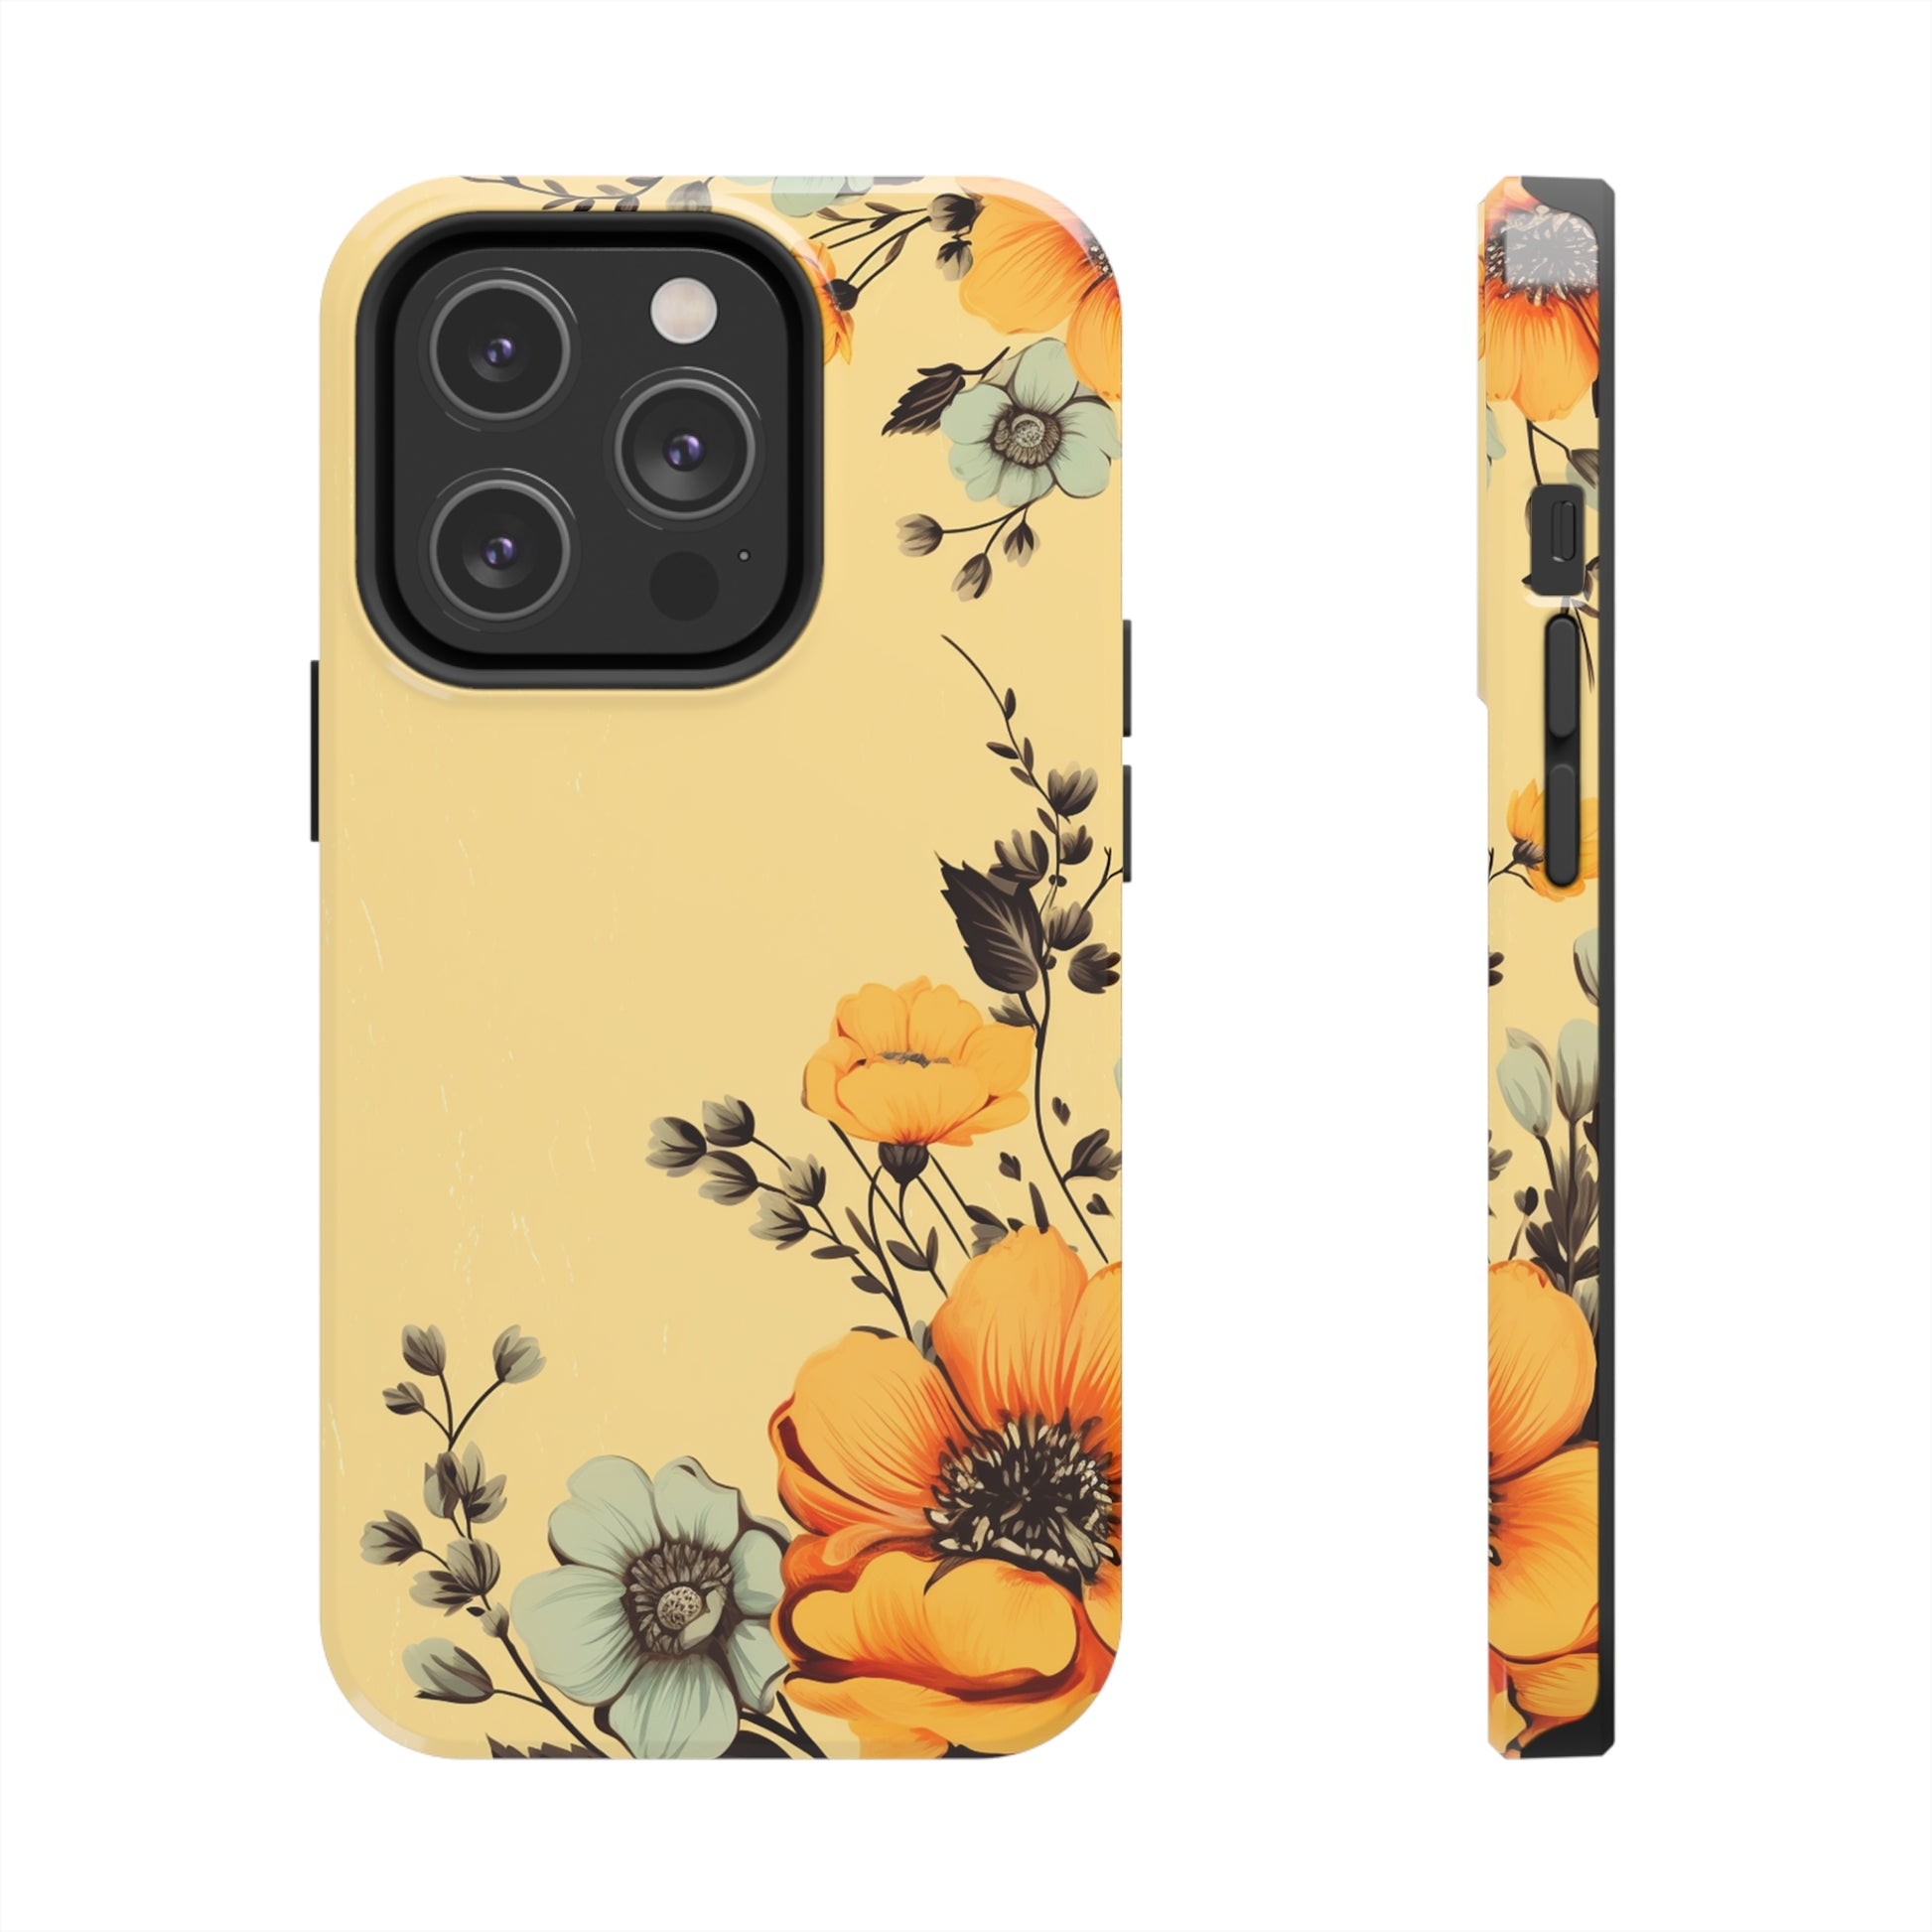 Protective iPhone 11 and 14 case with ageless floral art